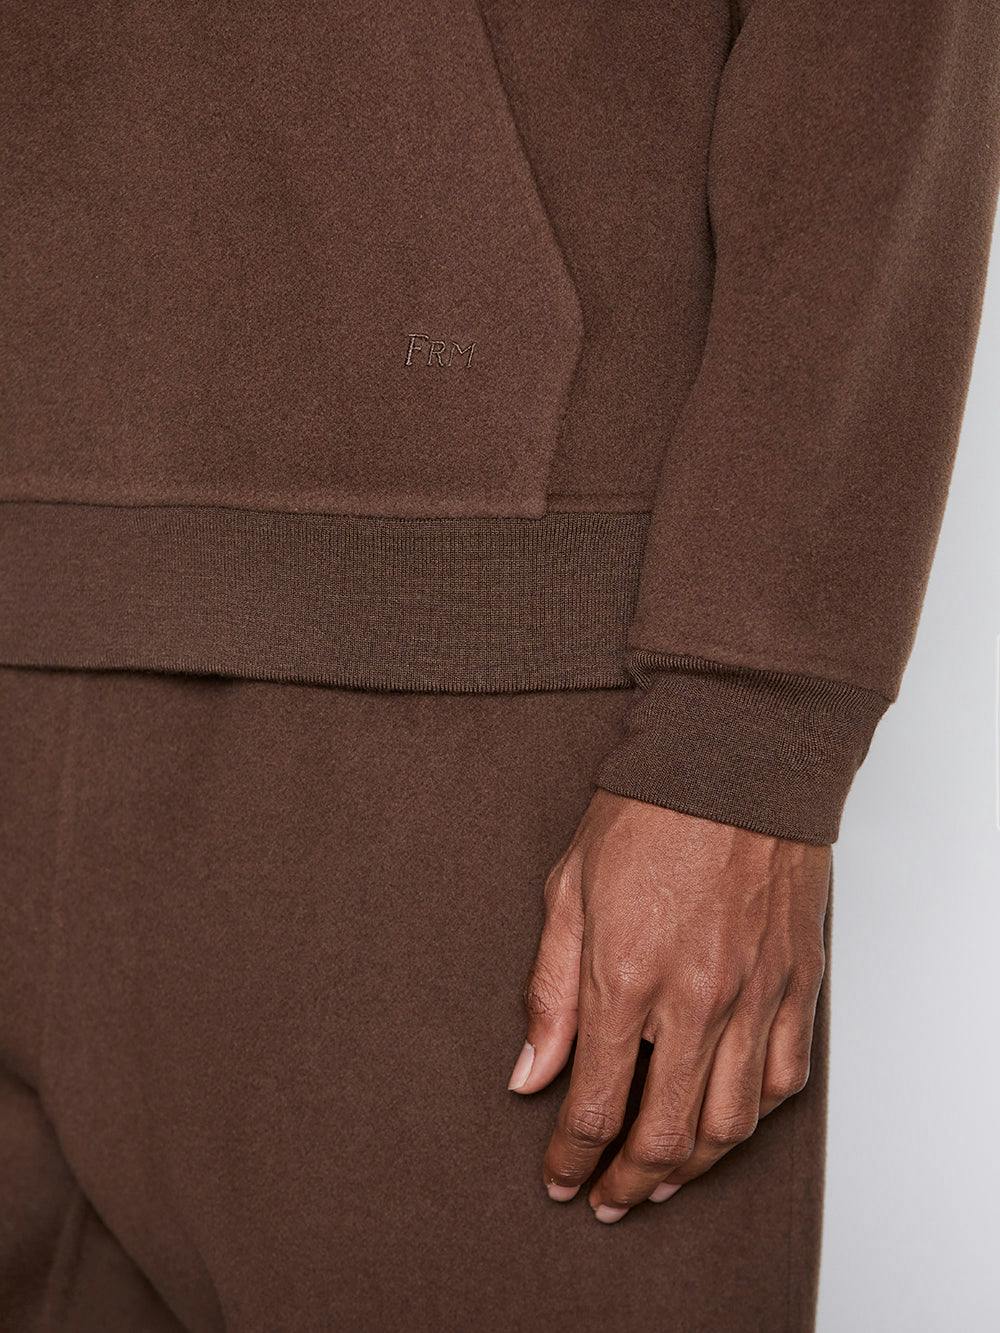 sweater detail view